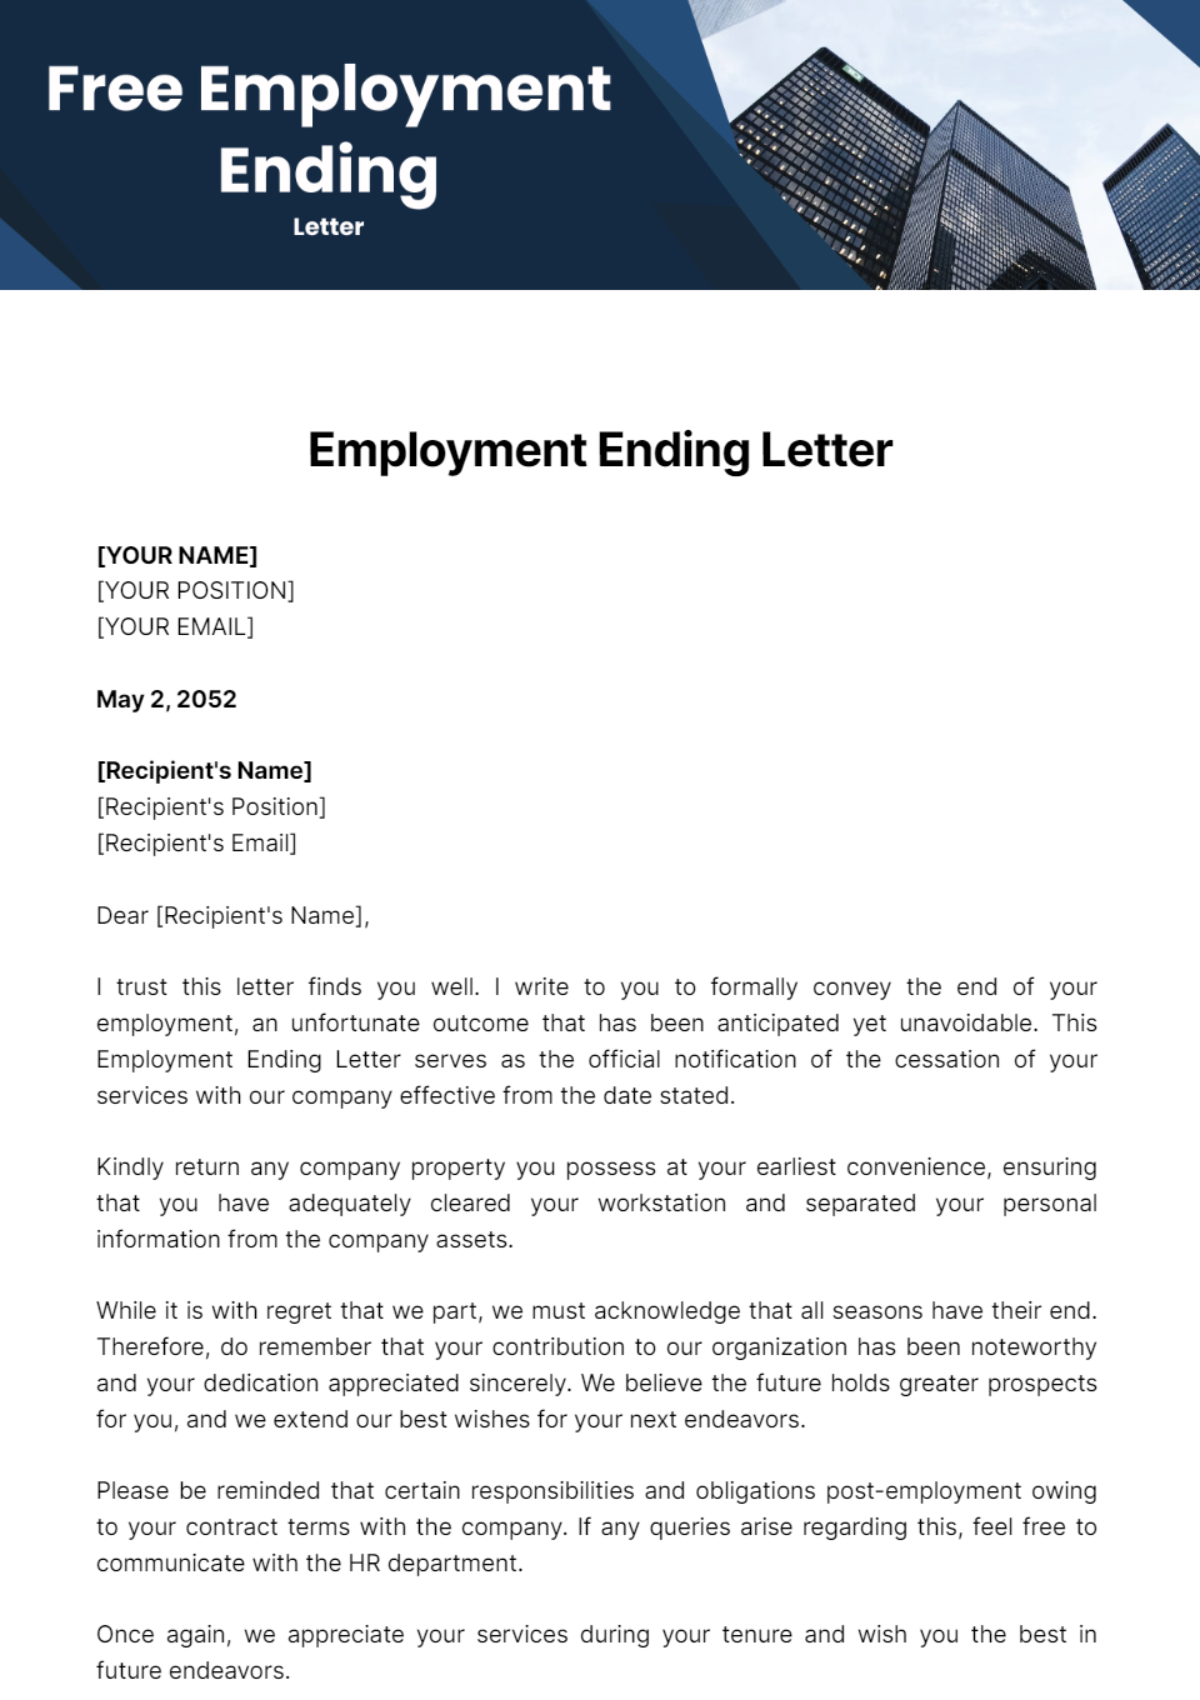 Free Employment Ending Letter Template